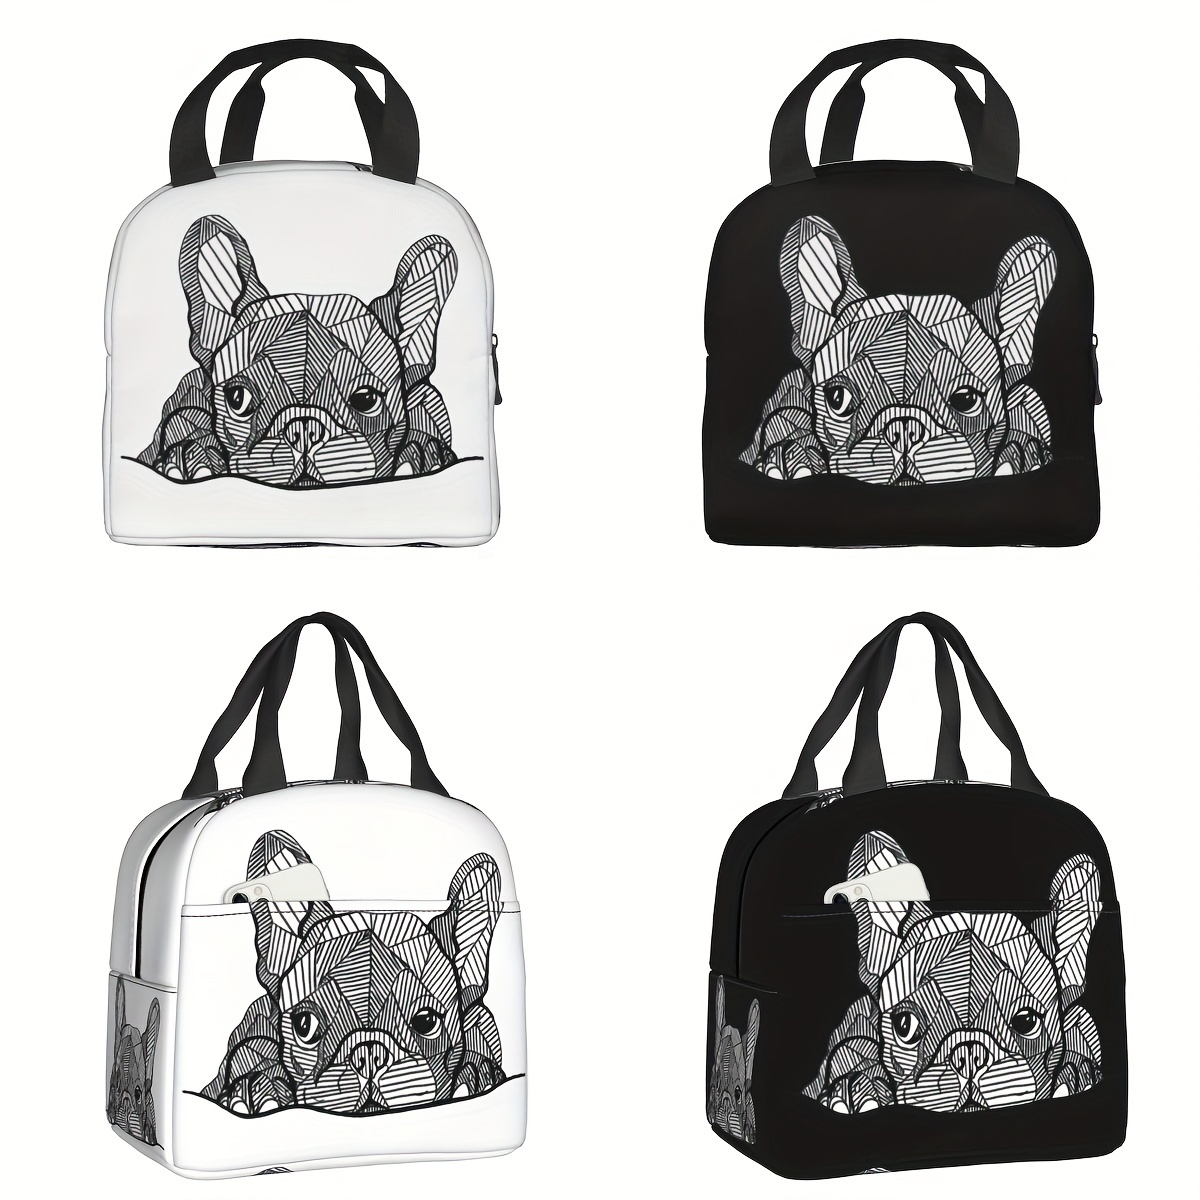 

French Bulldog Insulated Lunch Bag - Durable, Waterproof Oxford Fabric Bento Box Carrier For School, Office, And Outdoor Adventures - Large Capacity, Reusable